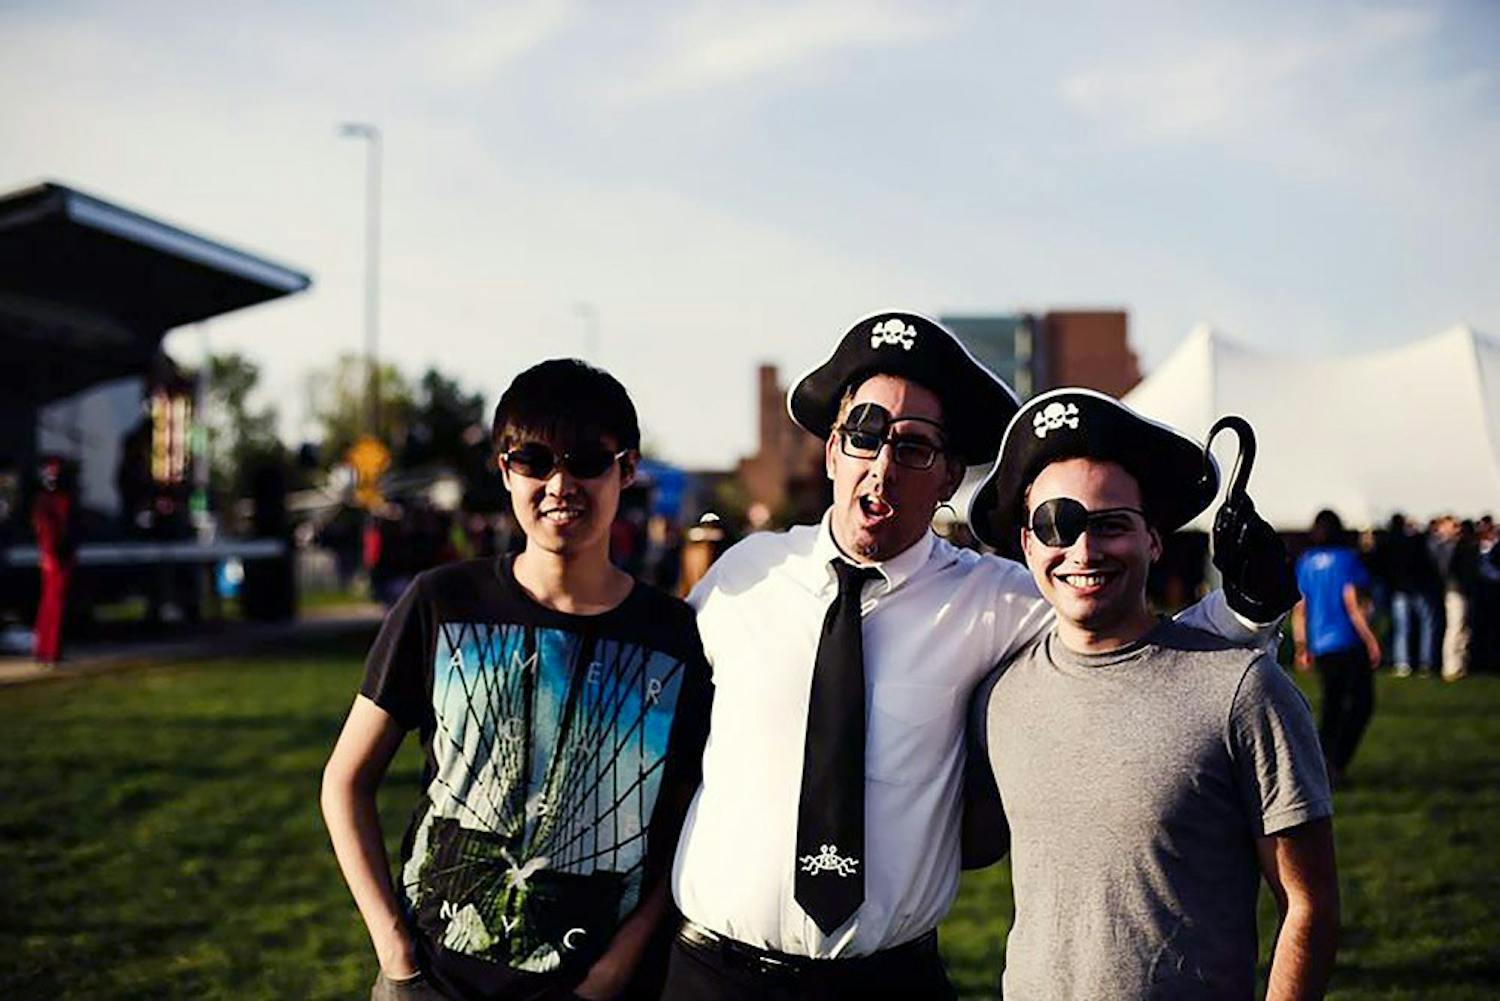 UB Pastafarians’ e-board members Douglas Hsu, Todd Fiore and Jonathan Sessler dressed as pirates, the traditional clothing of Pastafarians. The club was started as a way of discussing satirical and scientific topics.